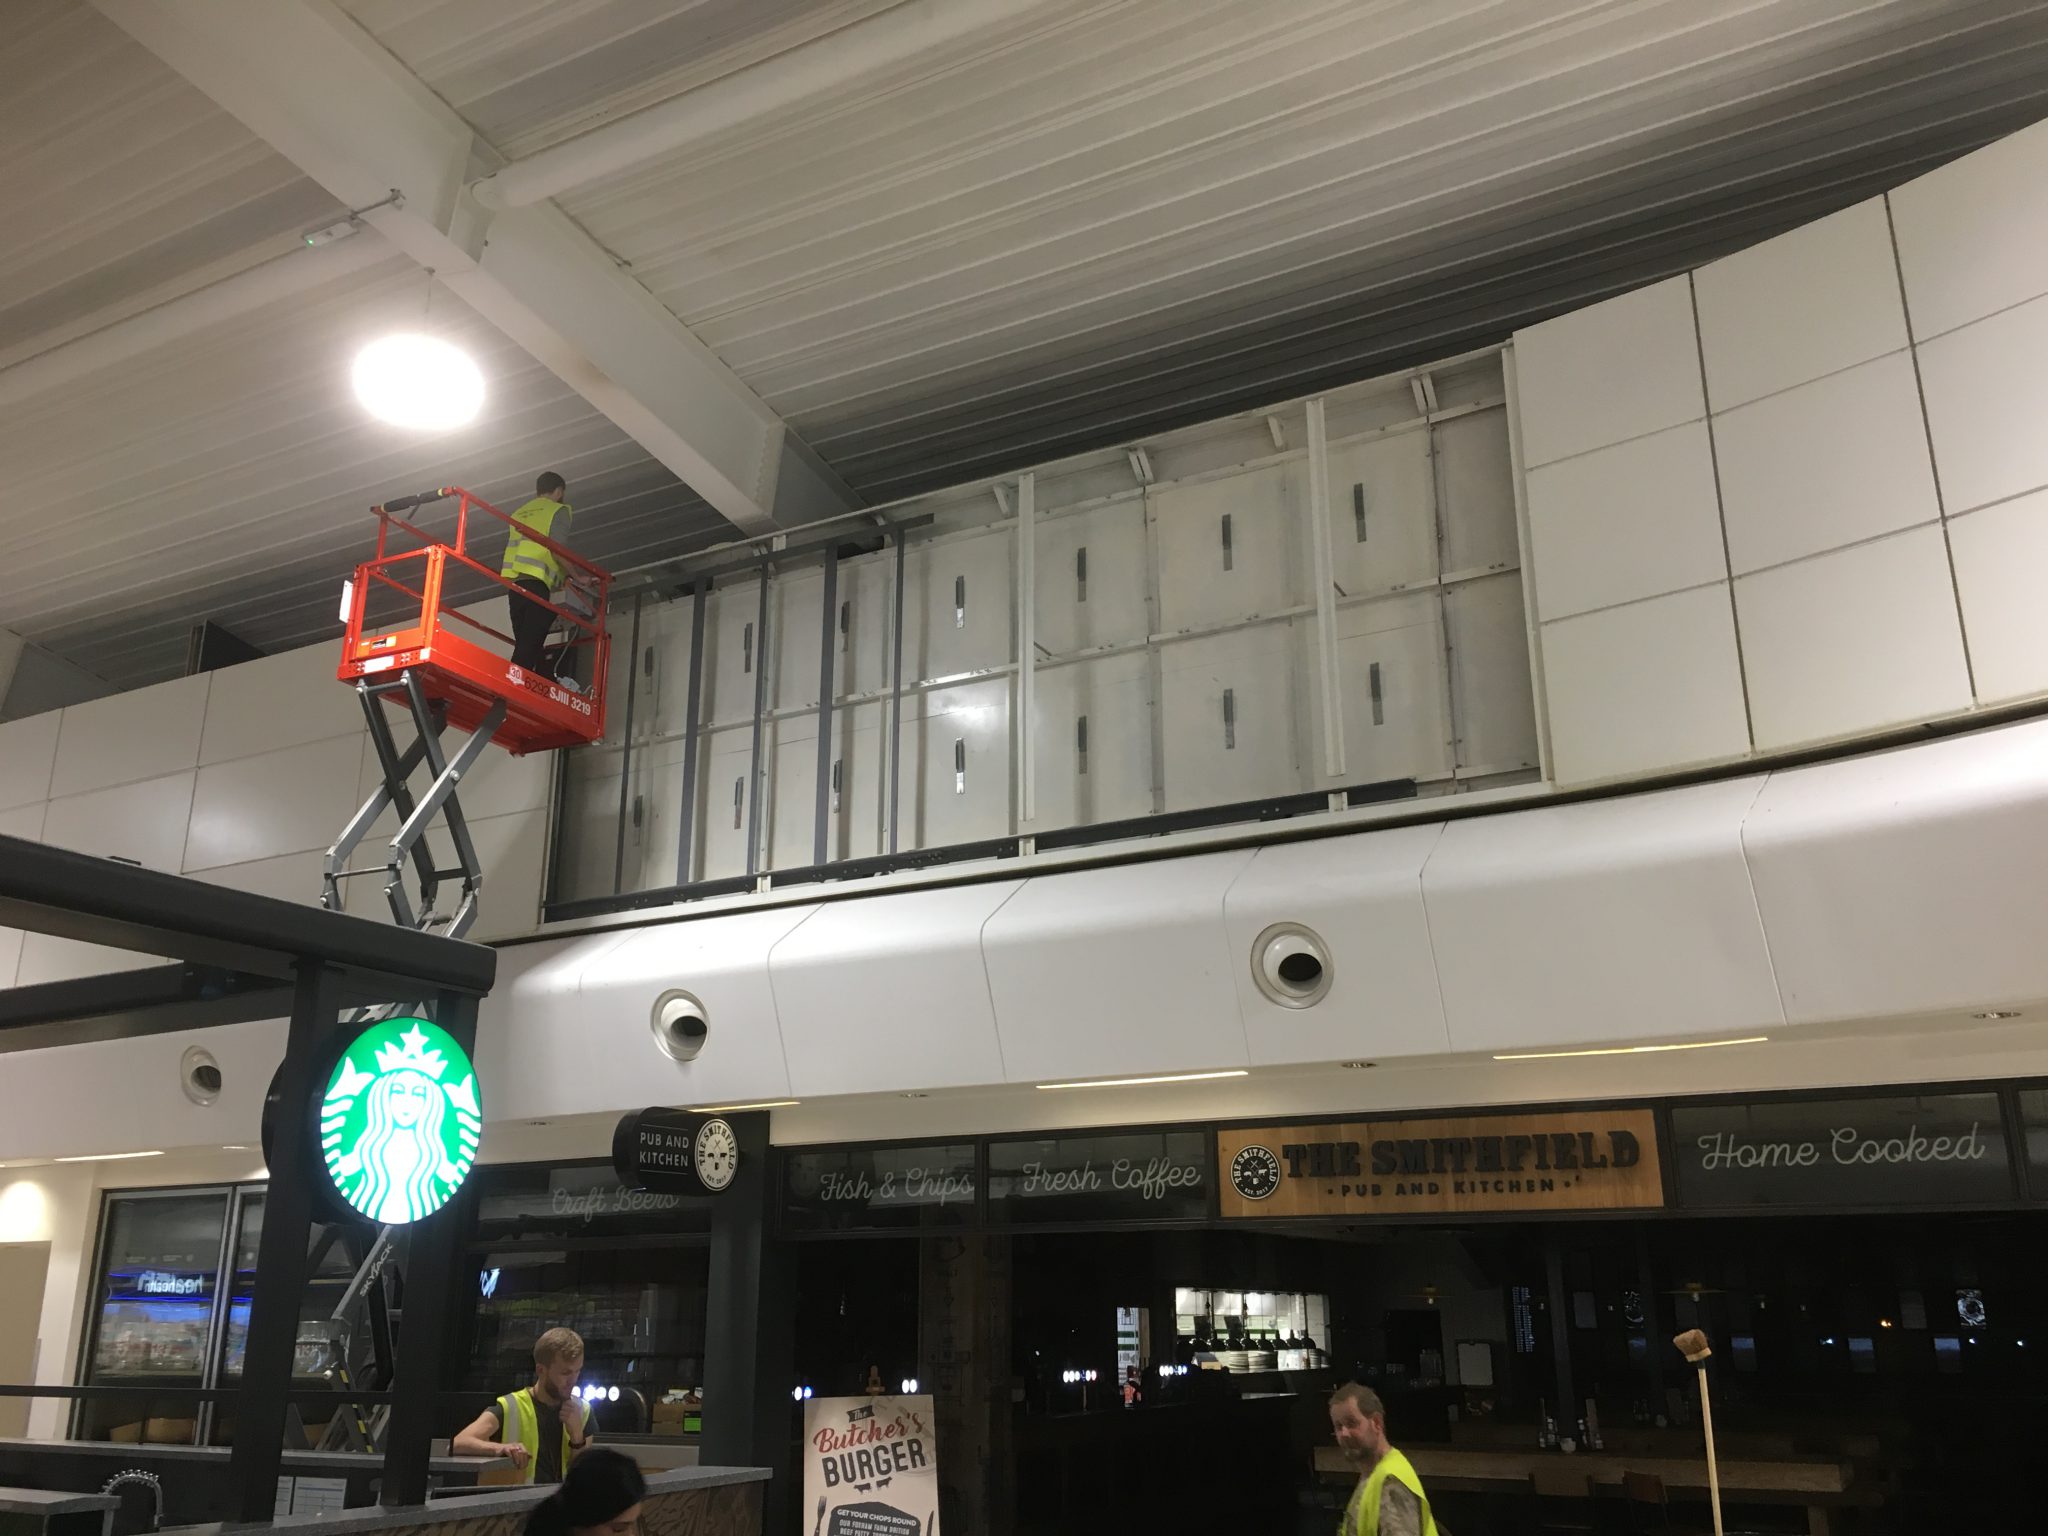 Health and Safety - LED Wall installation using scissor lifts at London Luton Airport